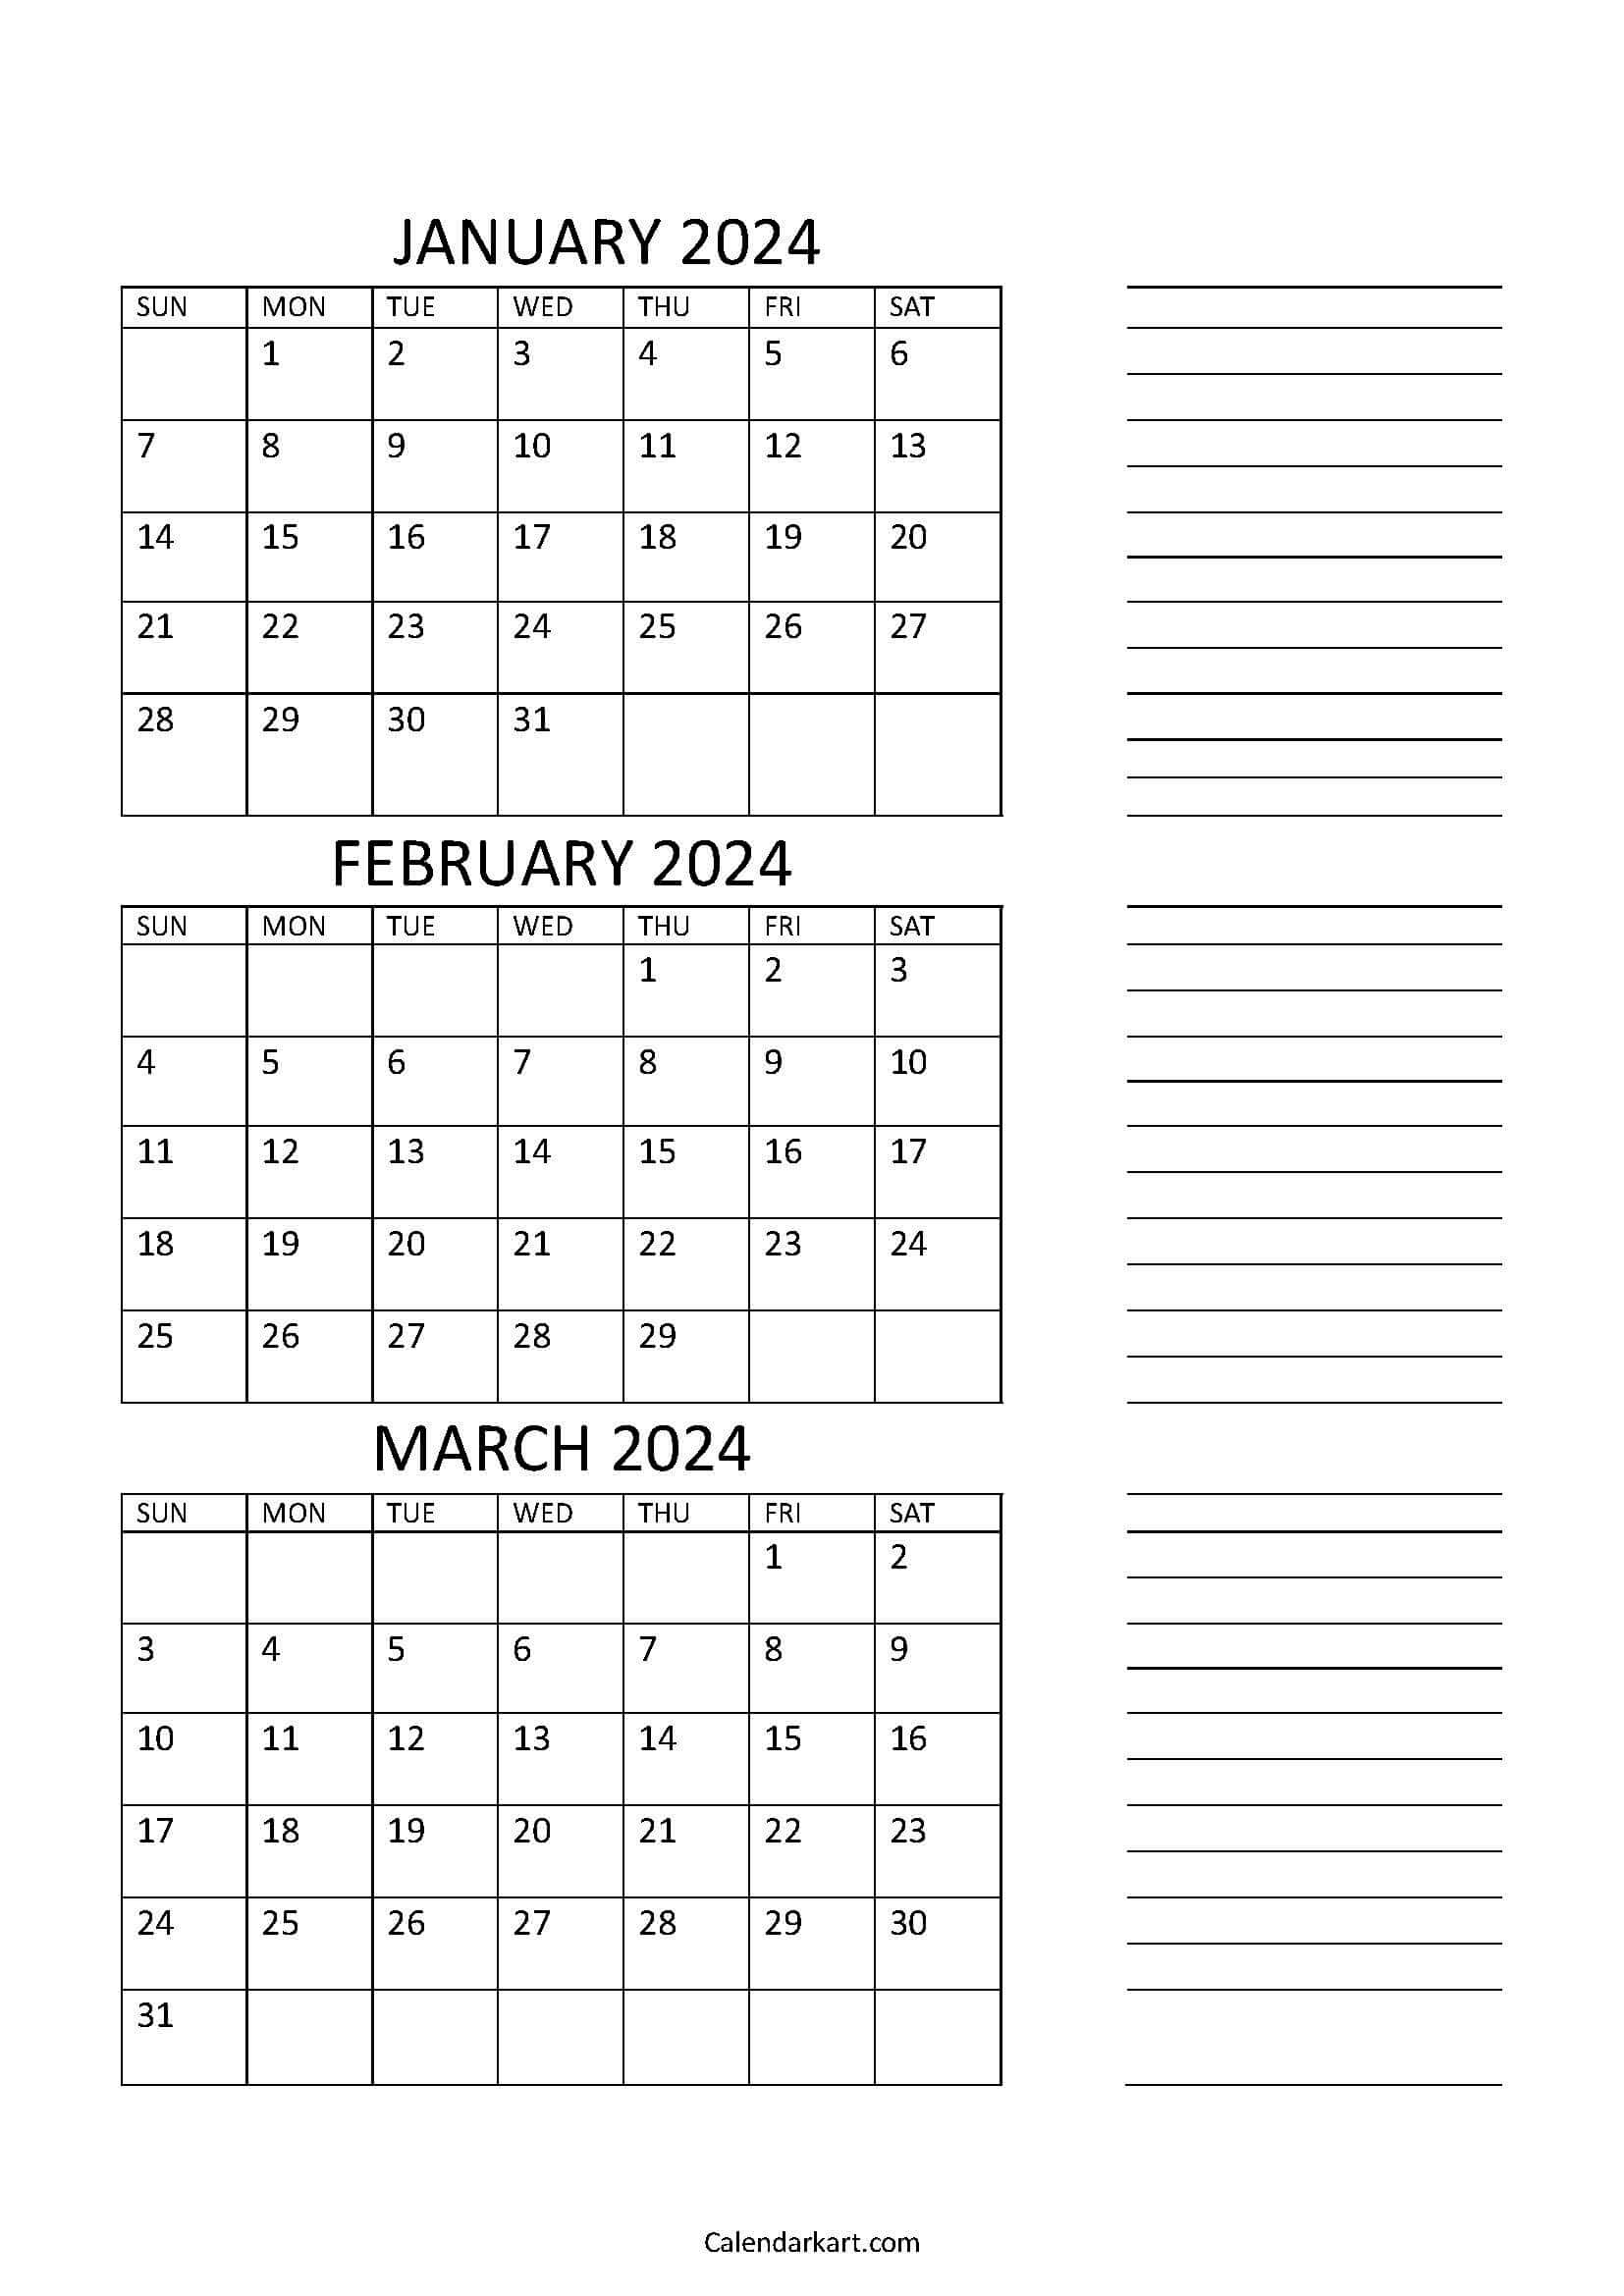 Free Printable January To March 2024 Calendar - Calendarkart regarding Free Printable Calendar 3 Months Per Page 2024